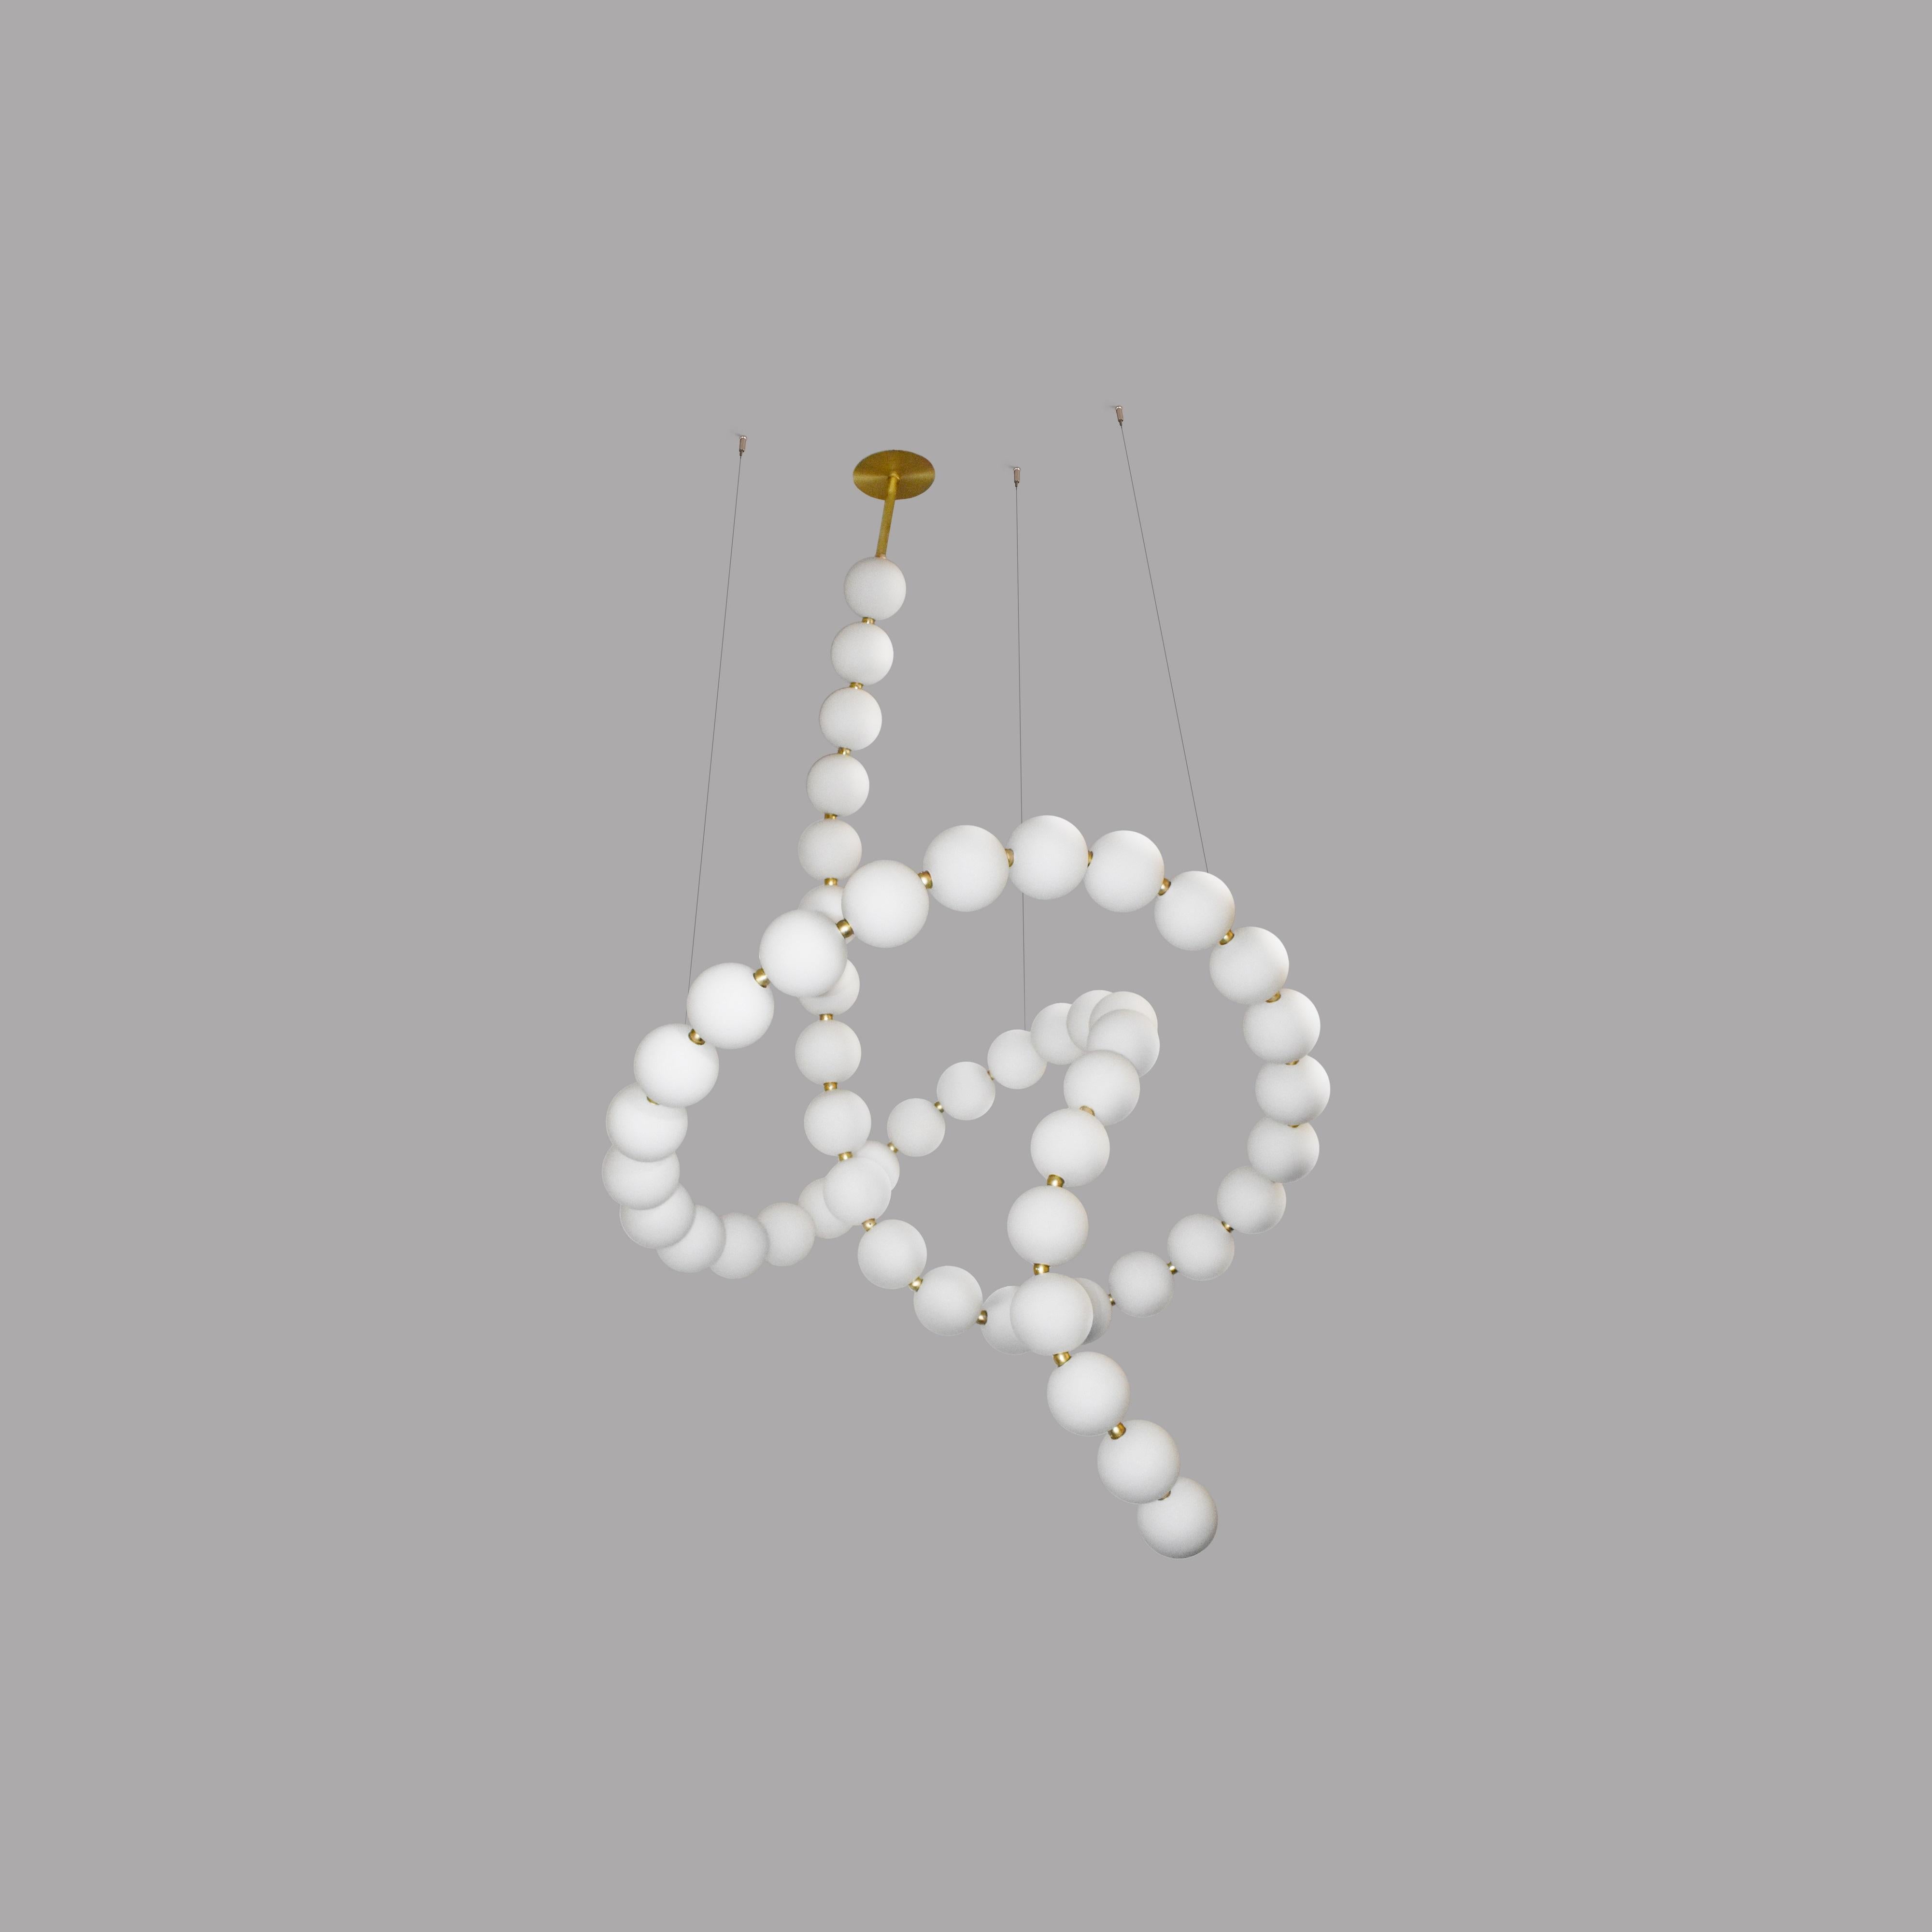 Very Large Voltige de Perles Chandelier by Ludovic Clément D’armont
Dimensions: Ø 122 x H 200 cm.
Materials: Blown glass and brass.

Every creation of Ludovic Clément d’Armont can be made to order in any requested dimensions. Please contact us for